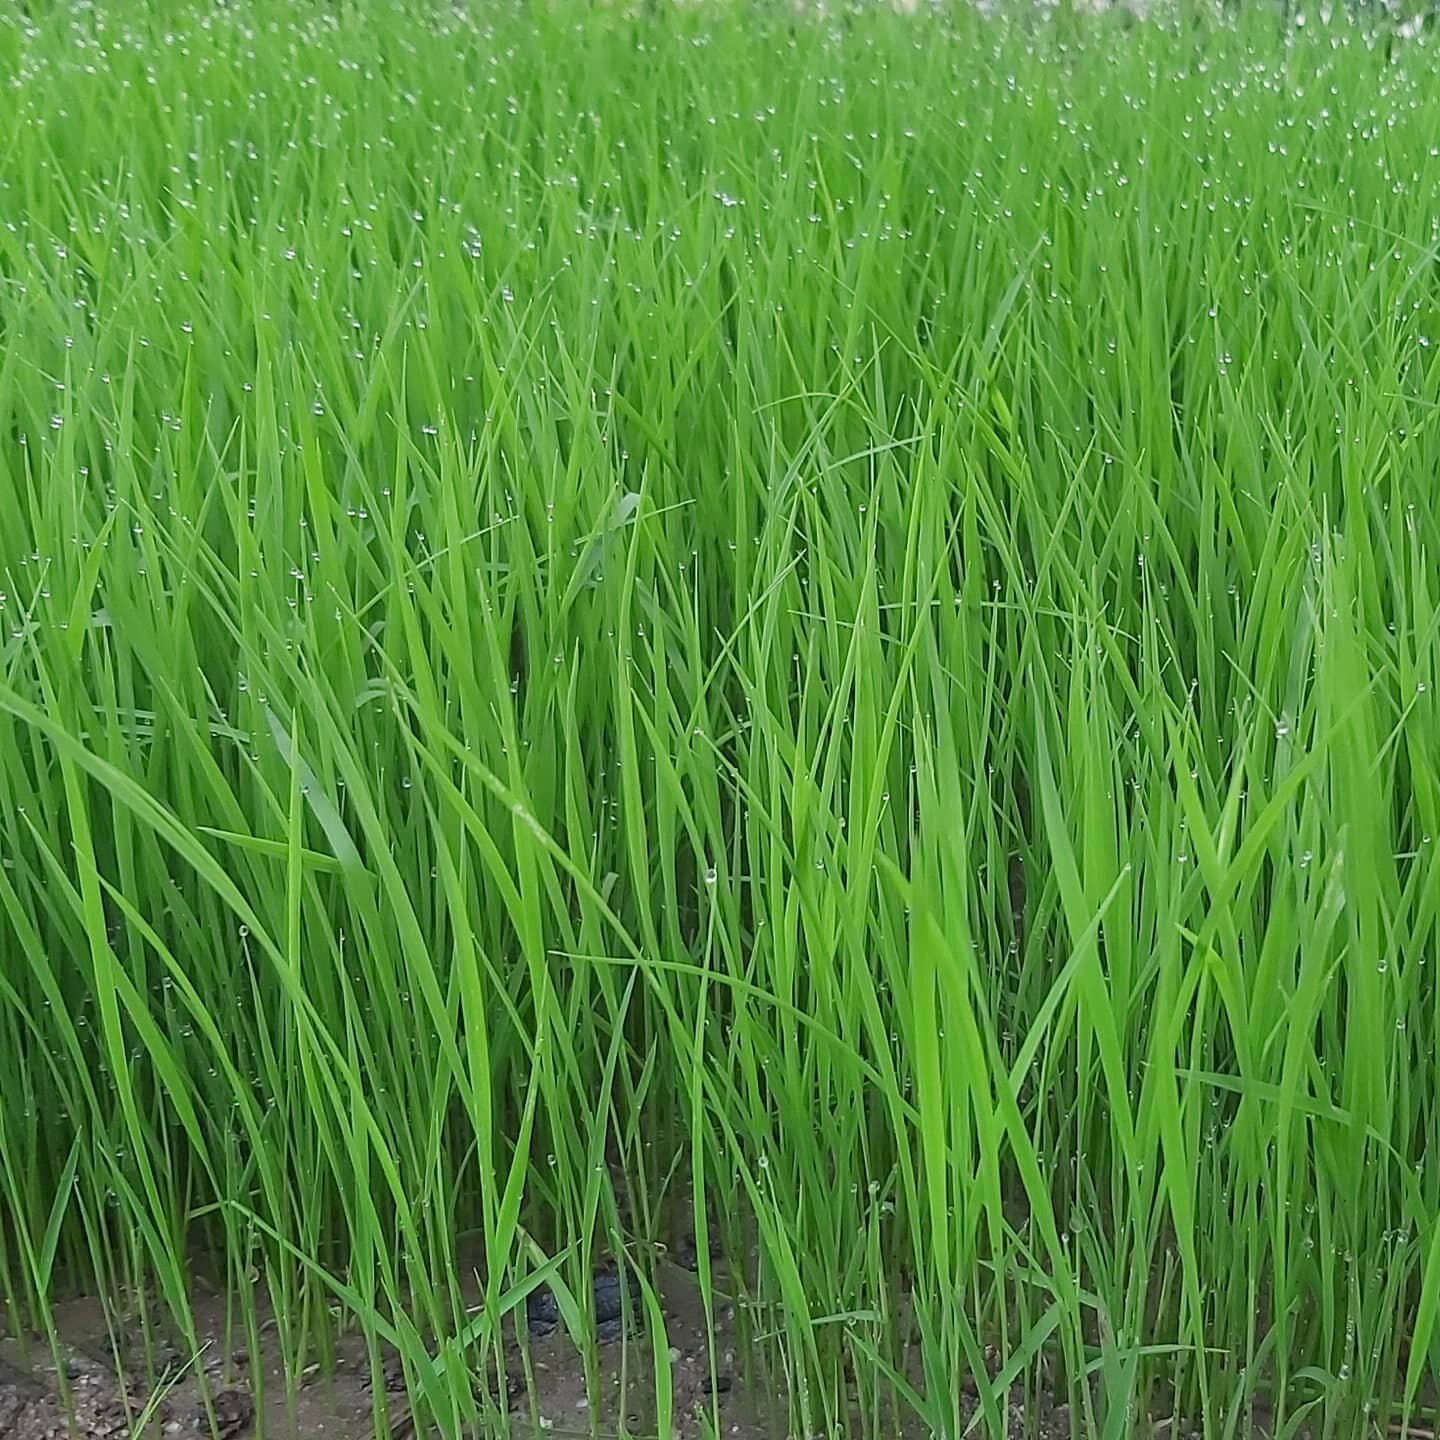 The&nbsp;System of Rice Intensification&nbsp;(SRI) is a farming methodology aimed at increasing the yield of&nbsp;rice&nbsp;produced in&nbsp;farming. It is a low water, labor-intensive, method that uses younger seedlings singly spaced # anders dan vr